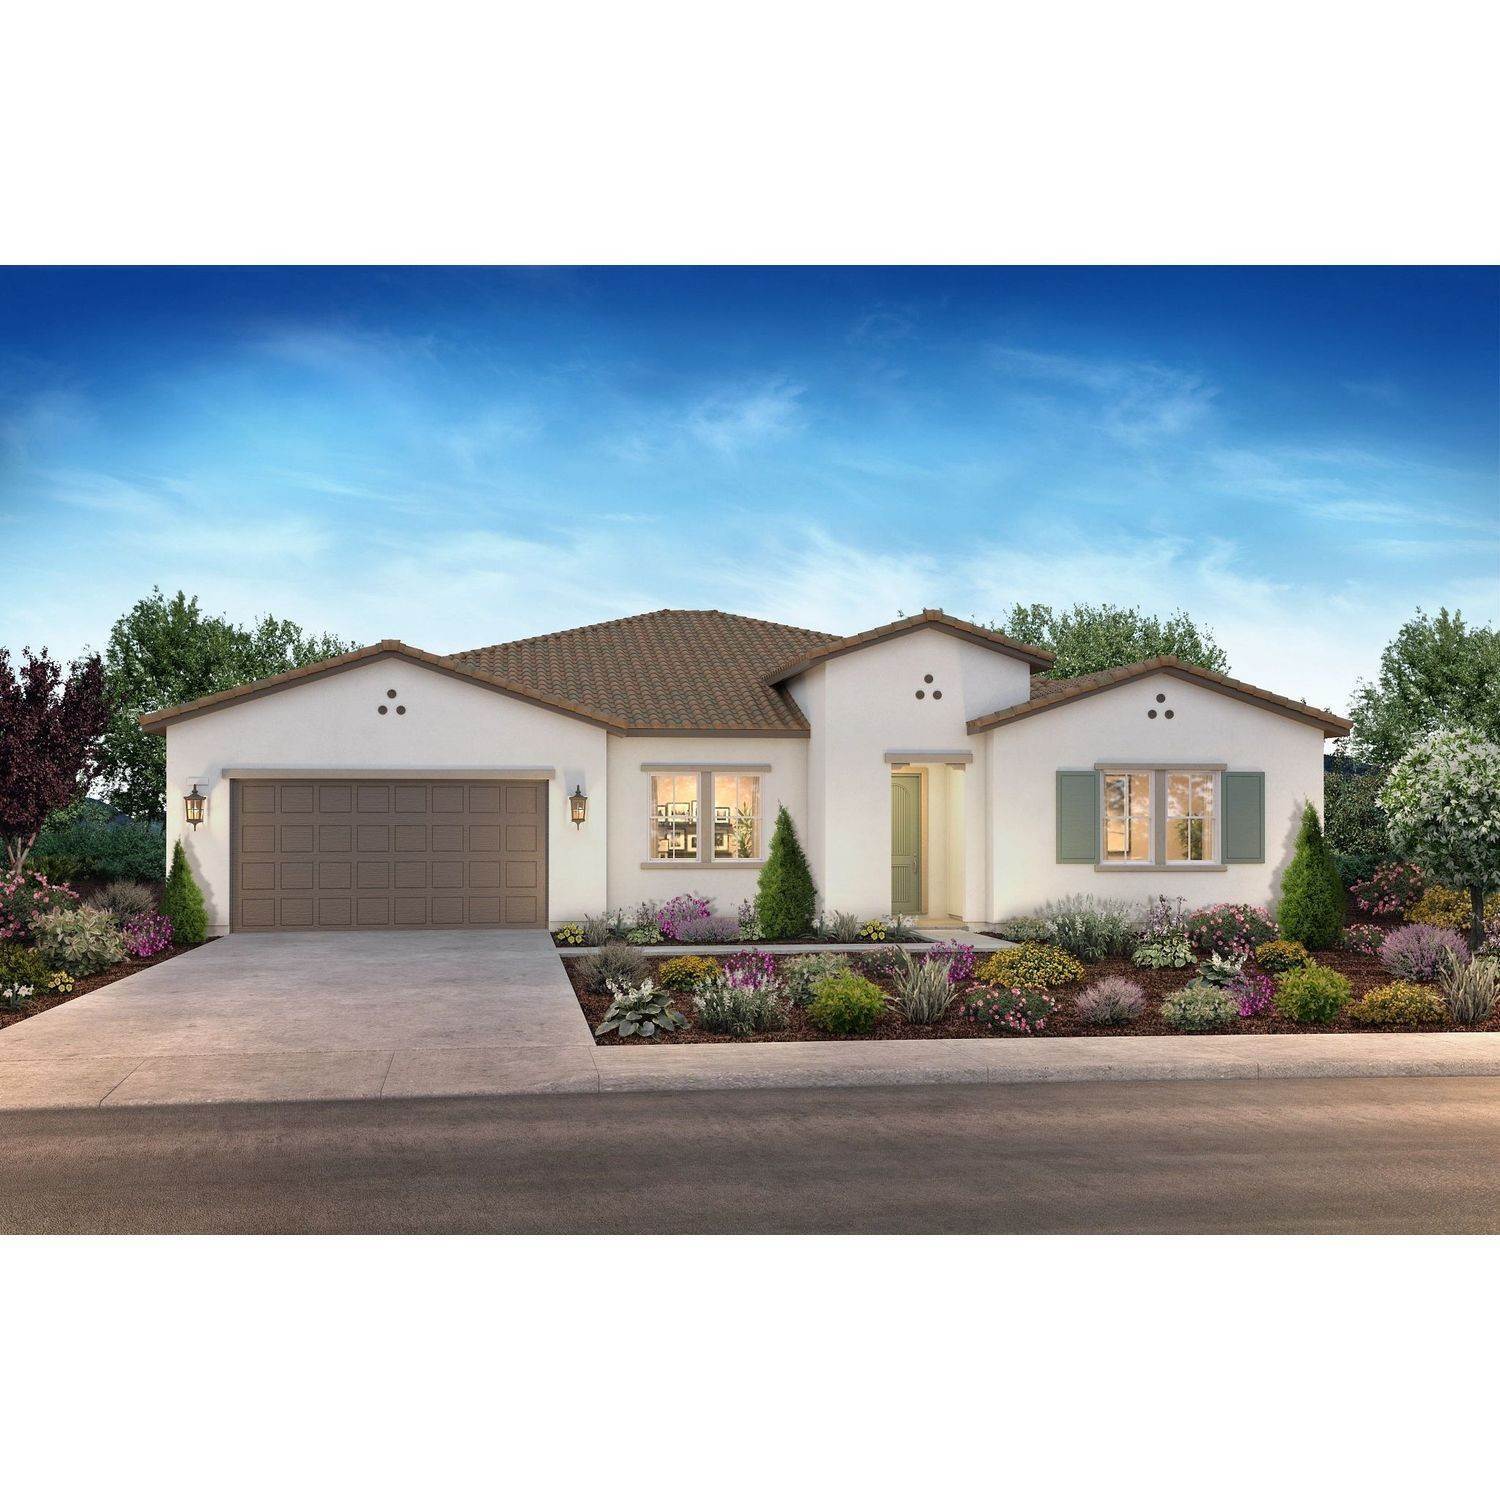 2. Single Family for Active at Orchard Trails - Plan 2 154 Continente Ave BRENTWOOD, CALIFORNIA 94513 UNITED STATES